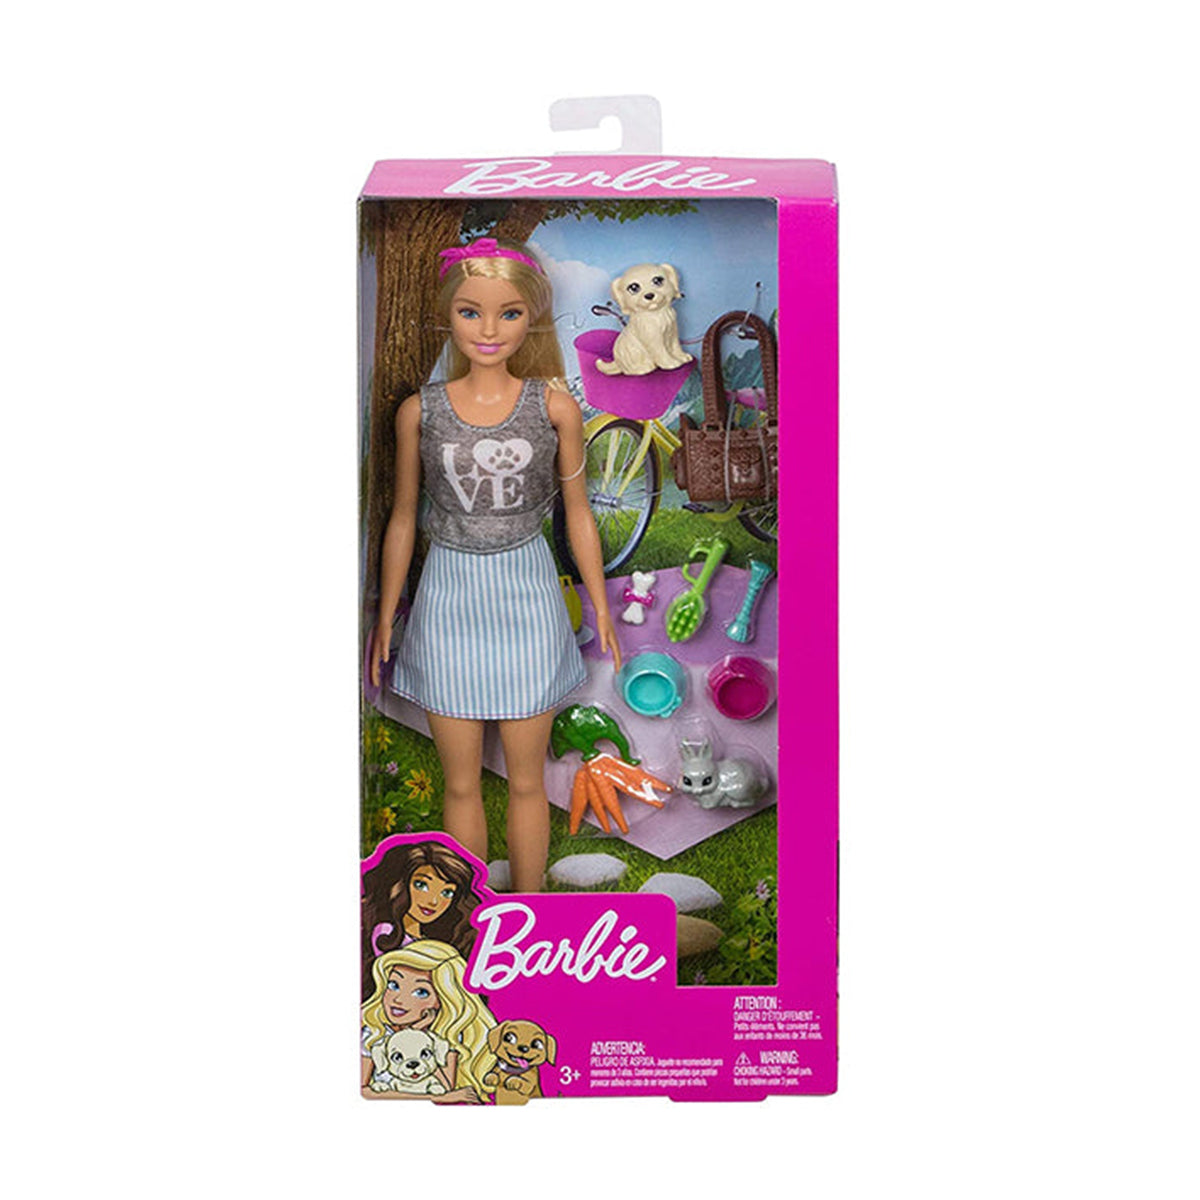 Barbie - Dolls and Pets Playset FPR48